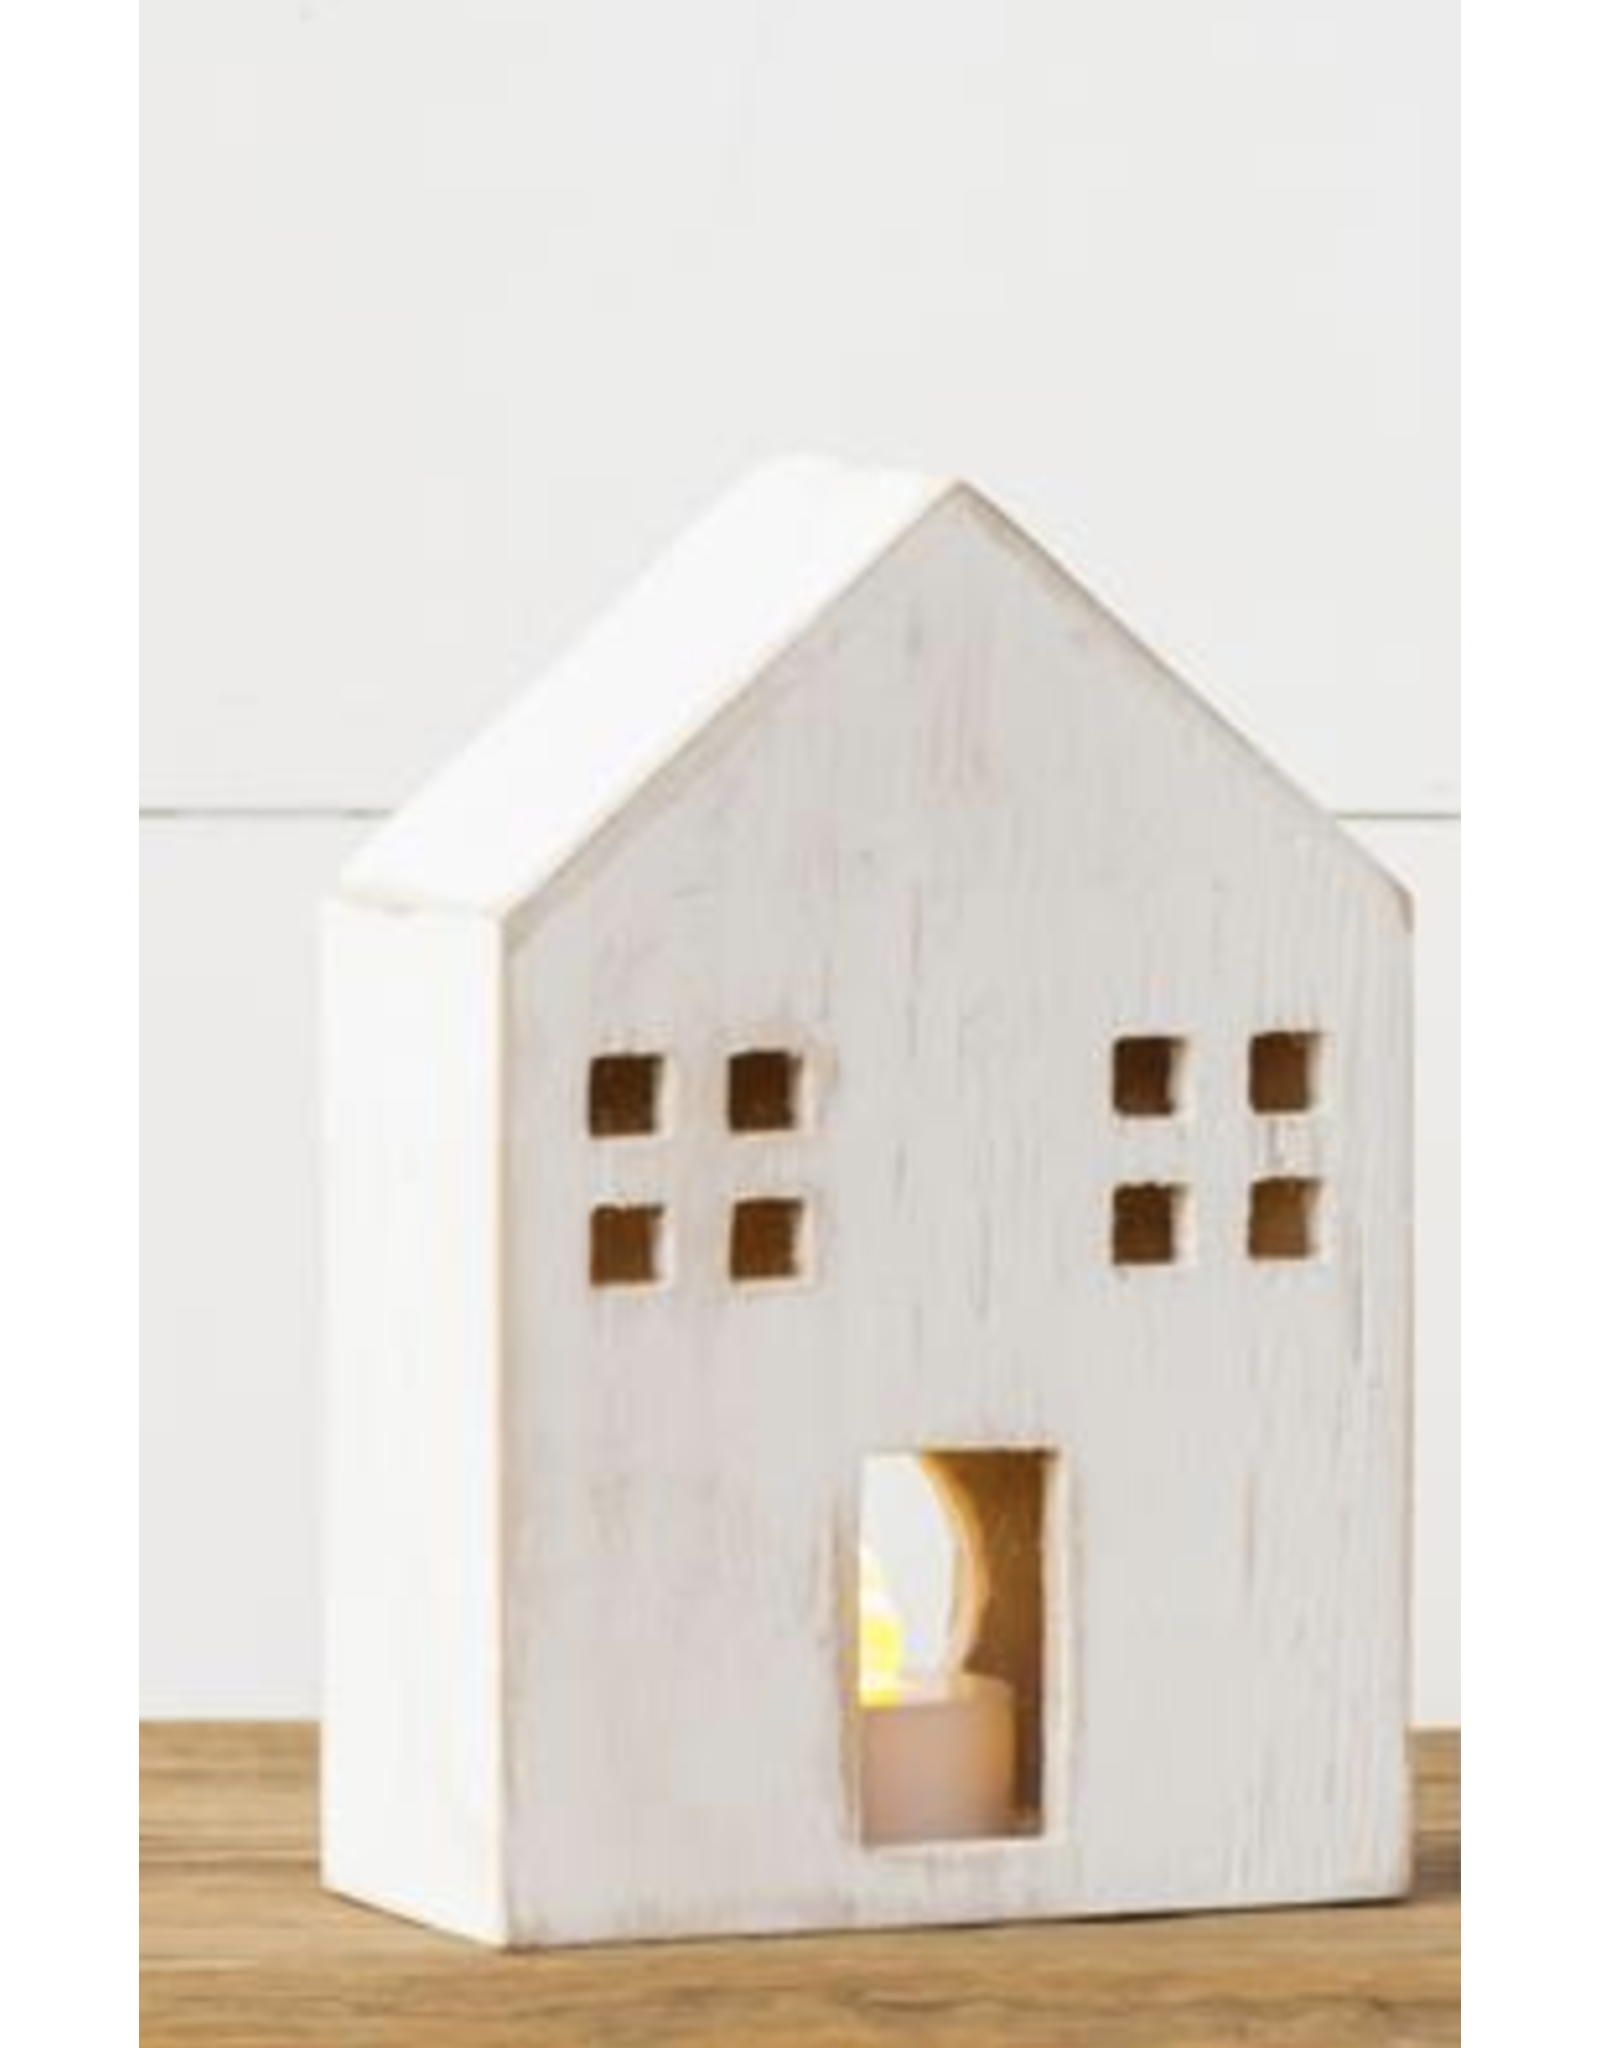 audreys White Distressed Wooden House with Light Hole, Small